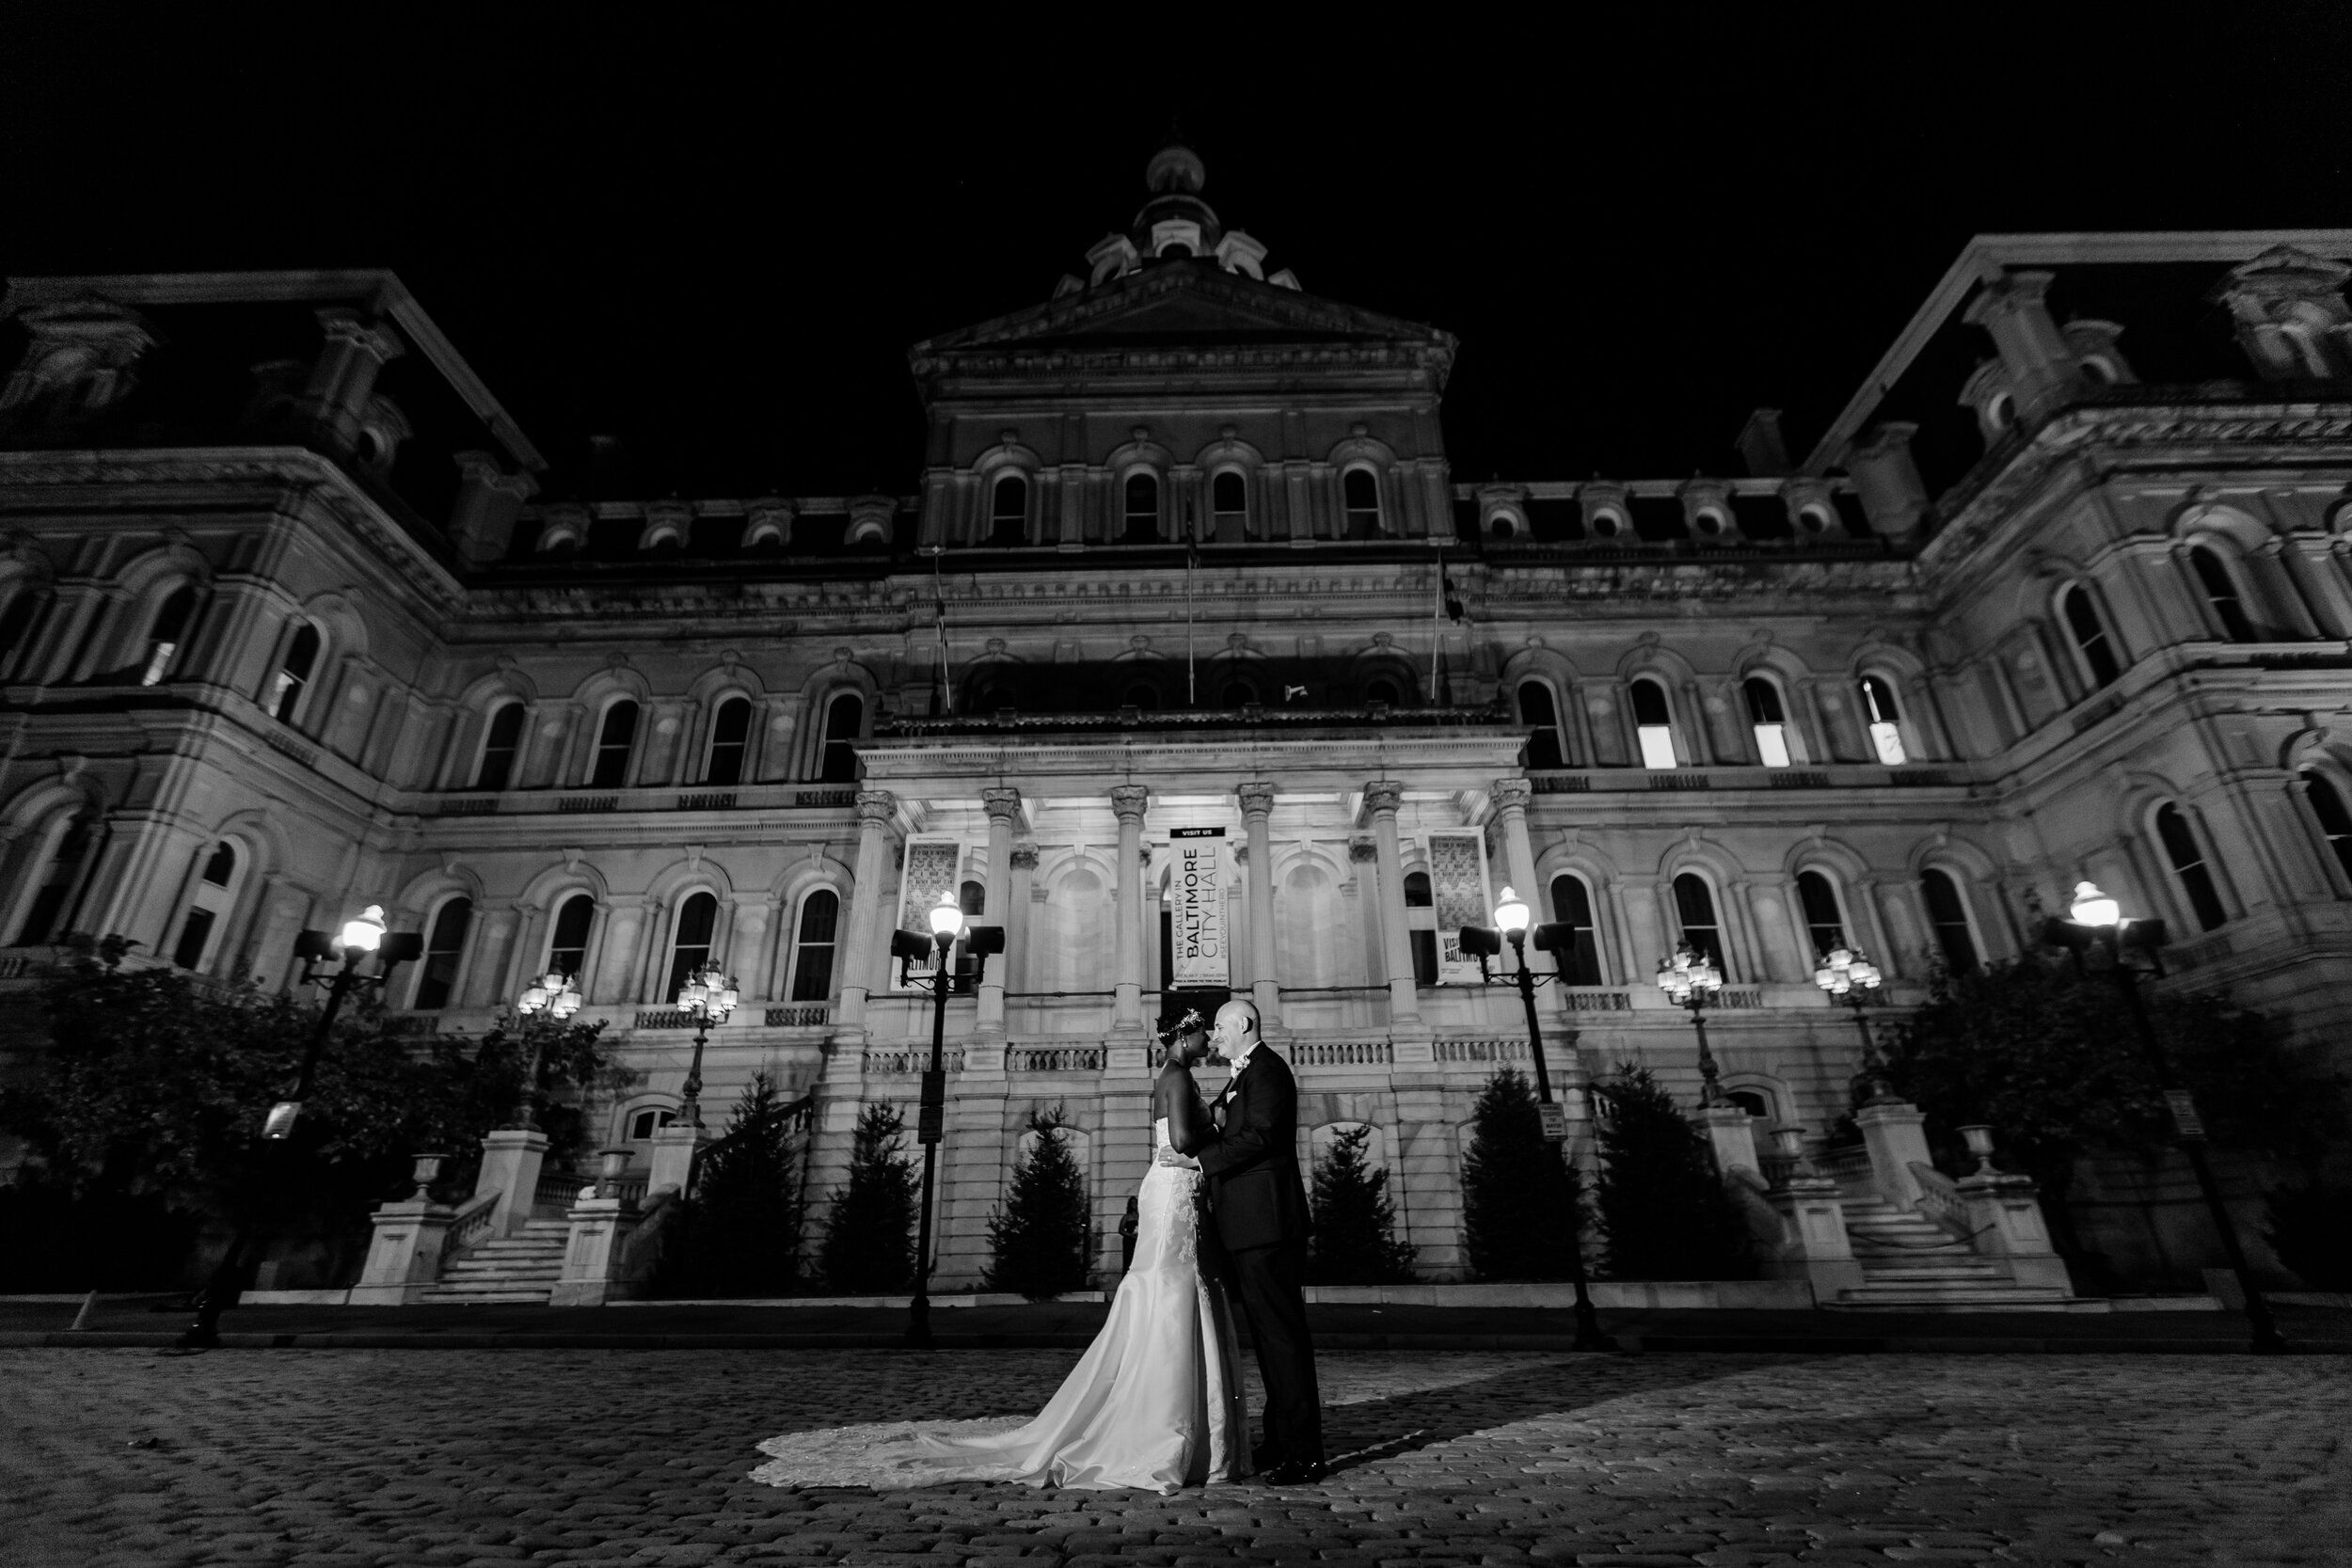 get married in baltimore city hall shot by megapixels media biracial couple wedding photographers maryland-101.jpg